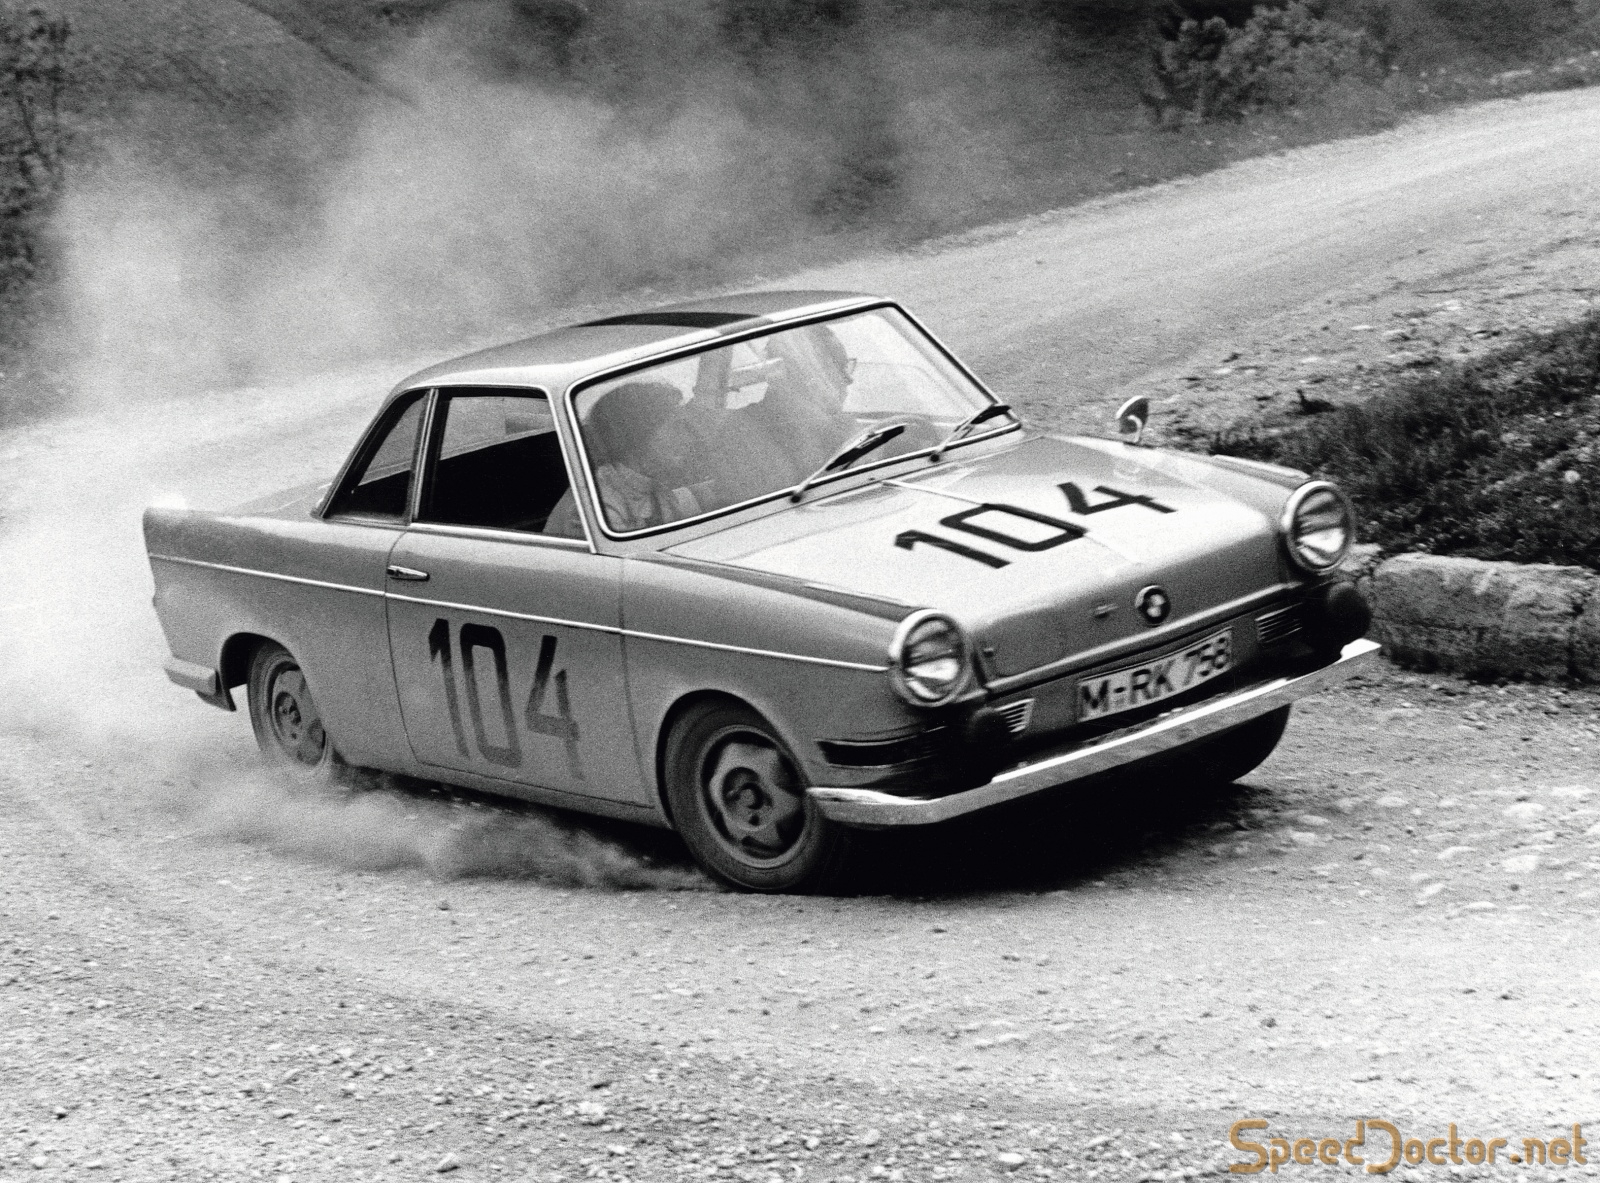 BMW 700 Coupe: Born for motorsport. The sporting qualities of the BMW 700